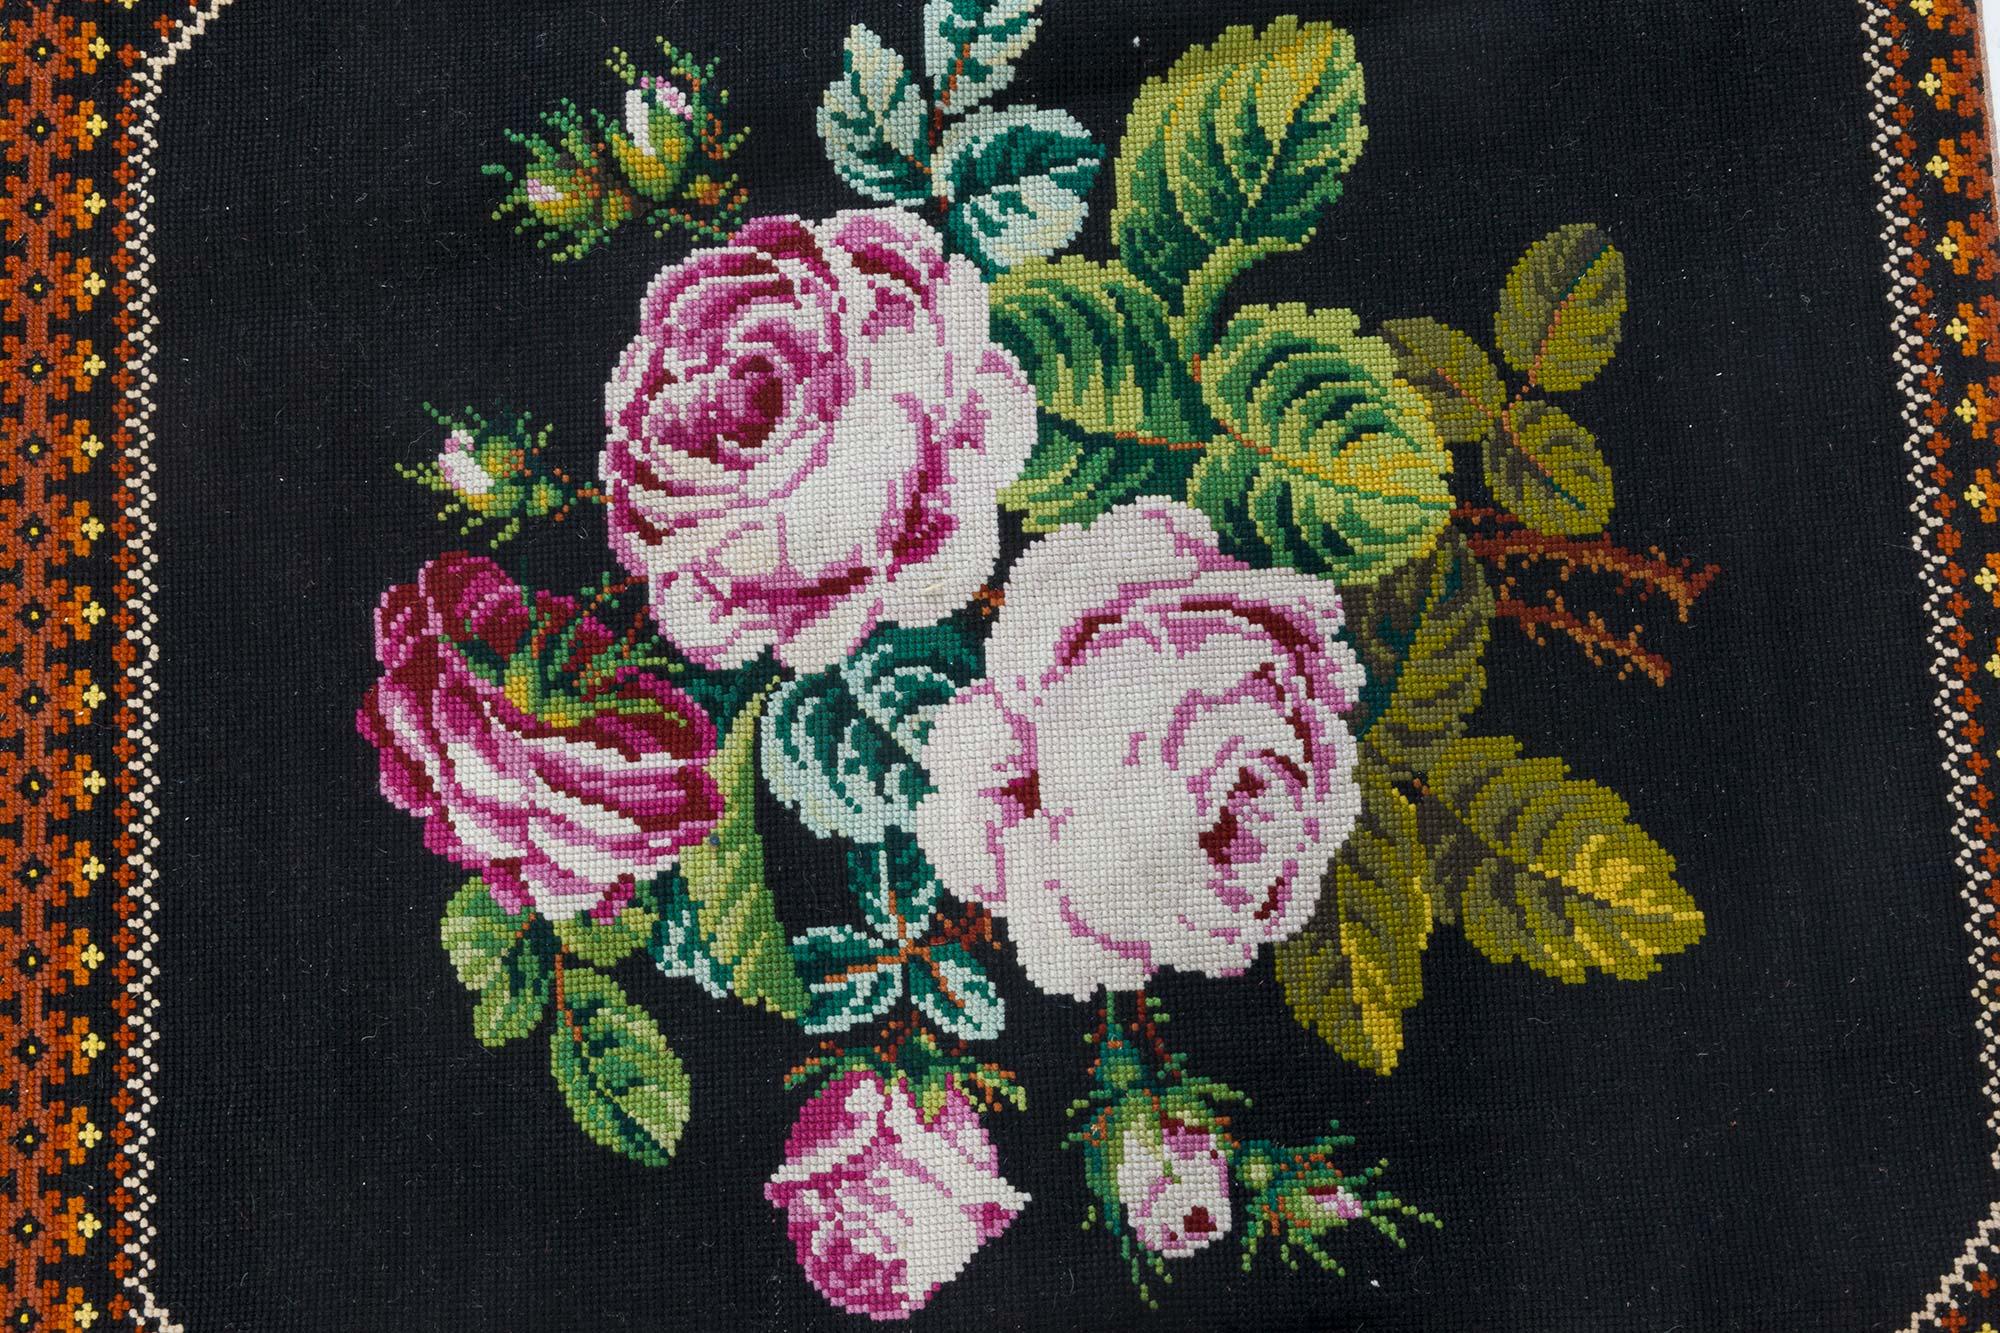 Mid-20th century floral needlework rug
Size: 9'7